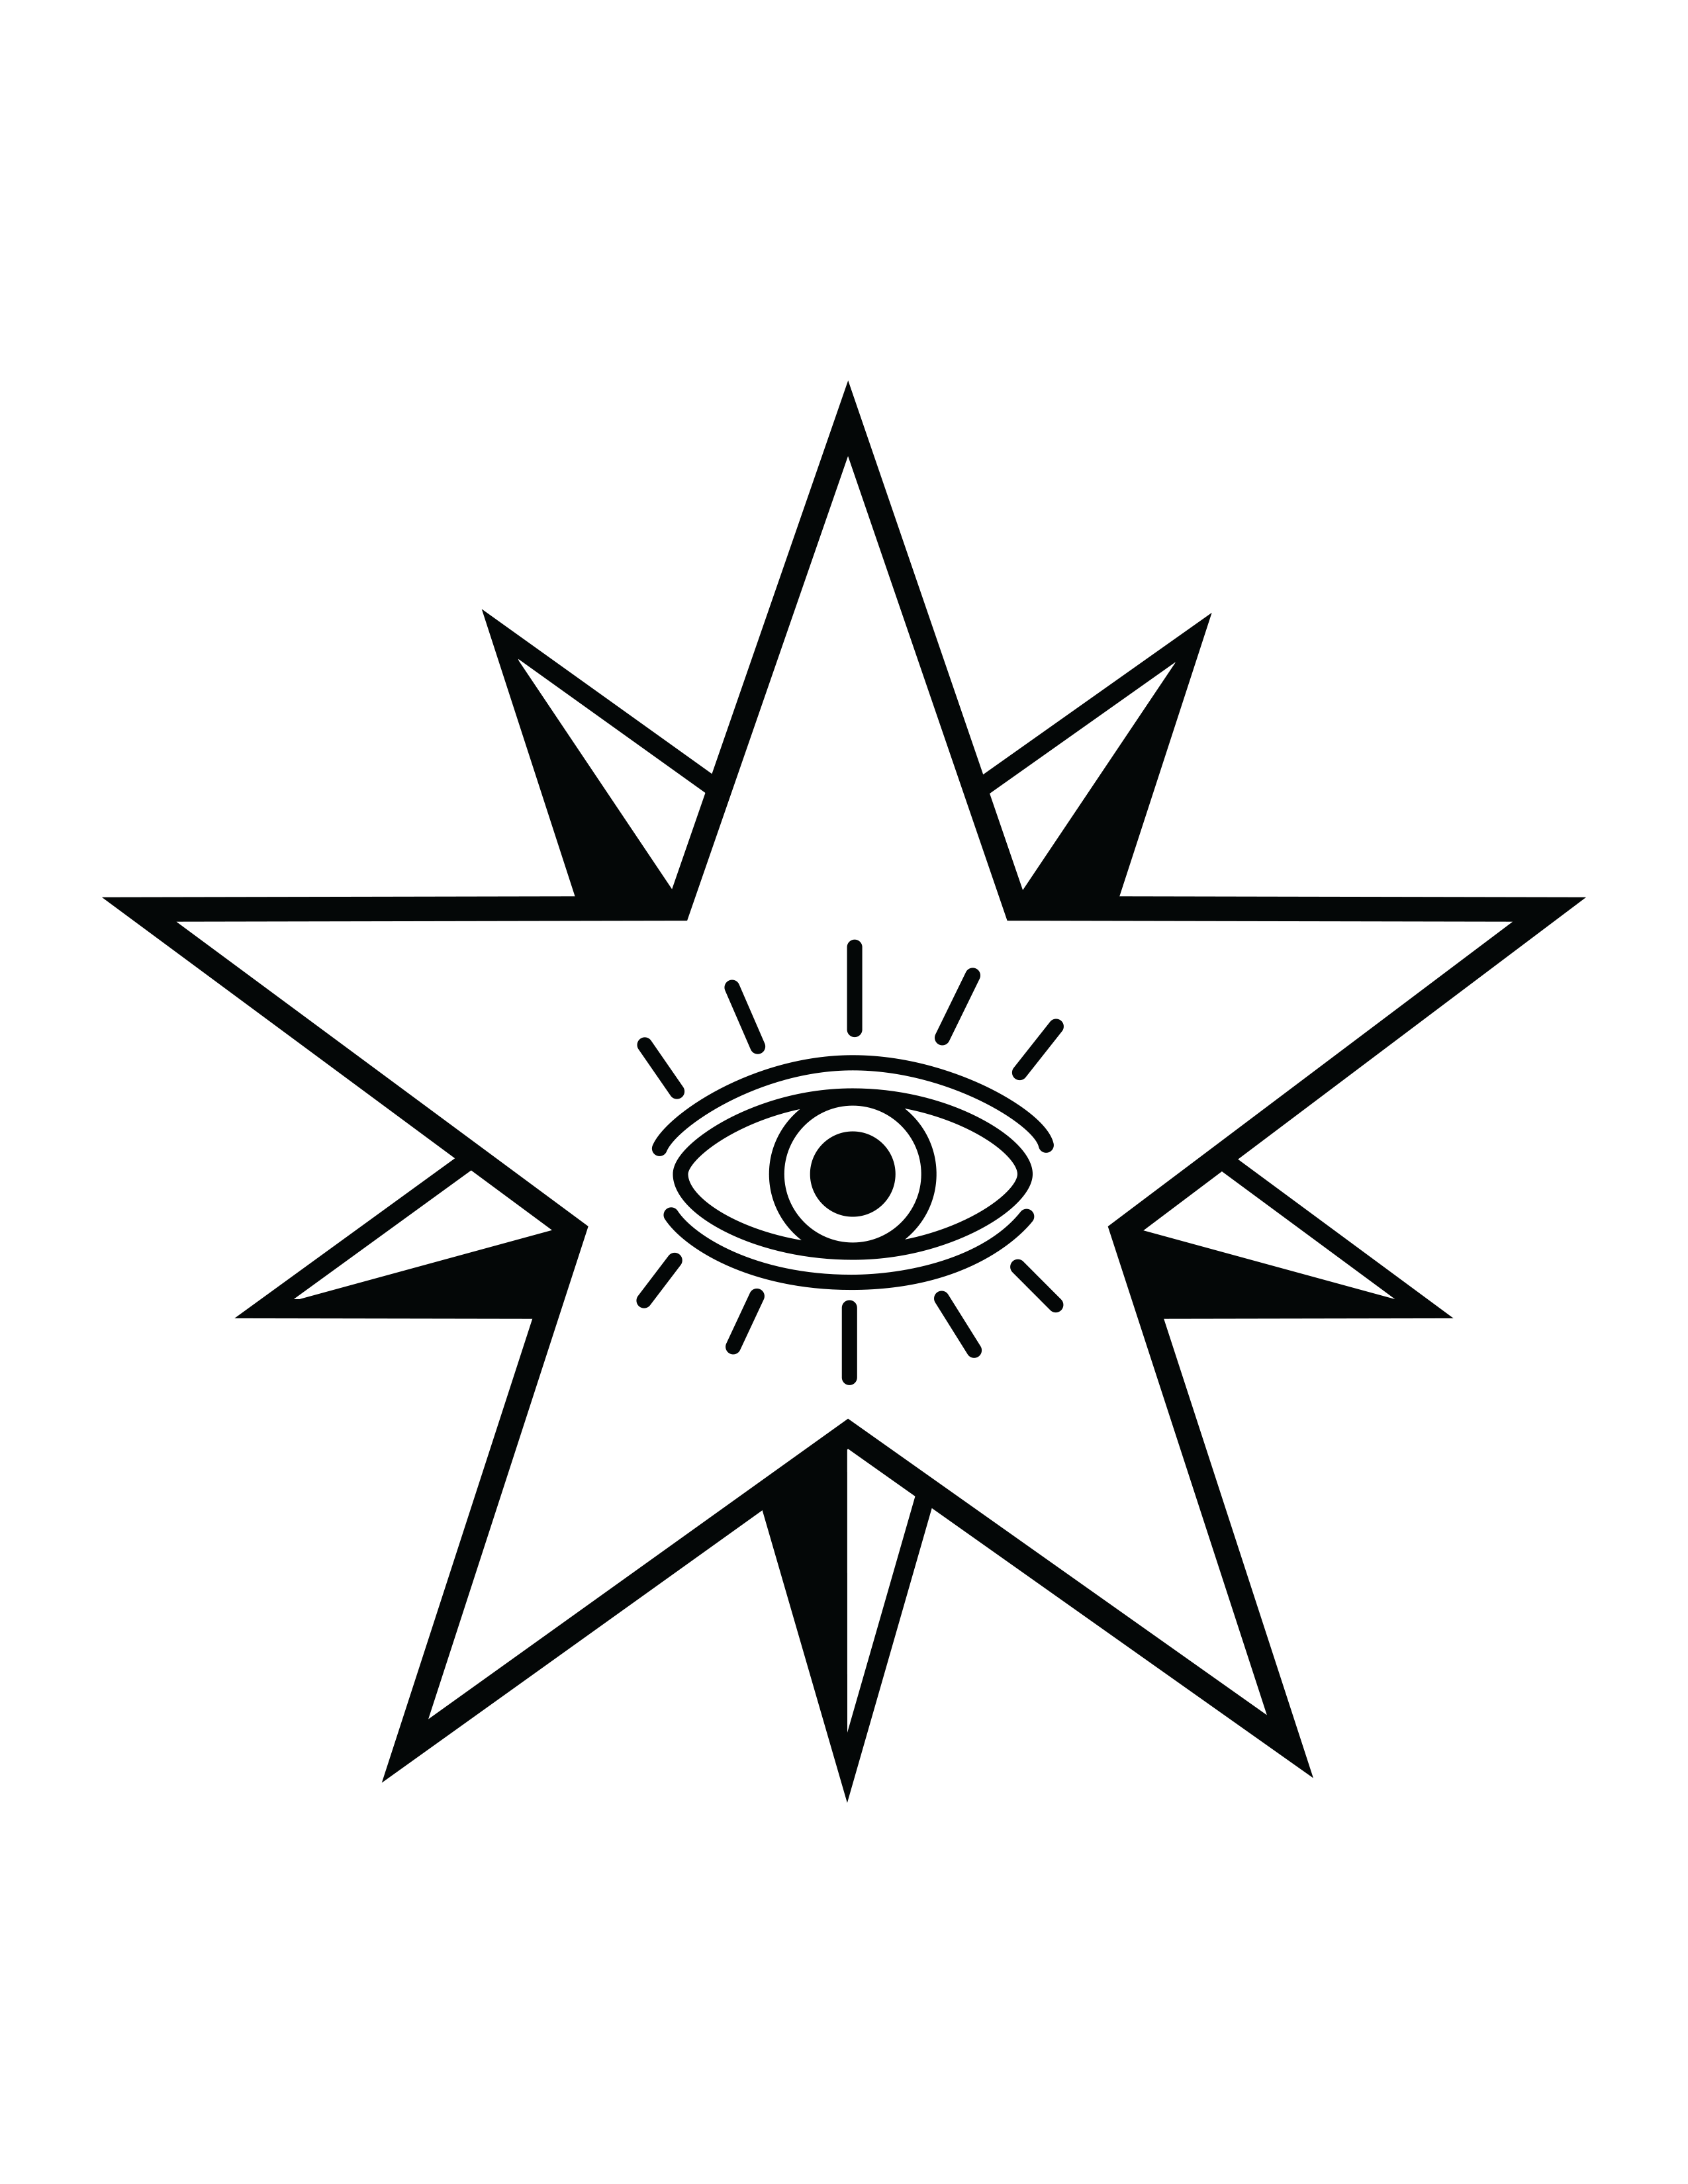 five pointed star with an eye in the center. The eye is slowly blinking.